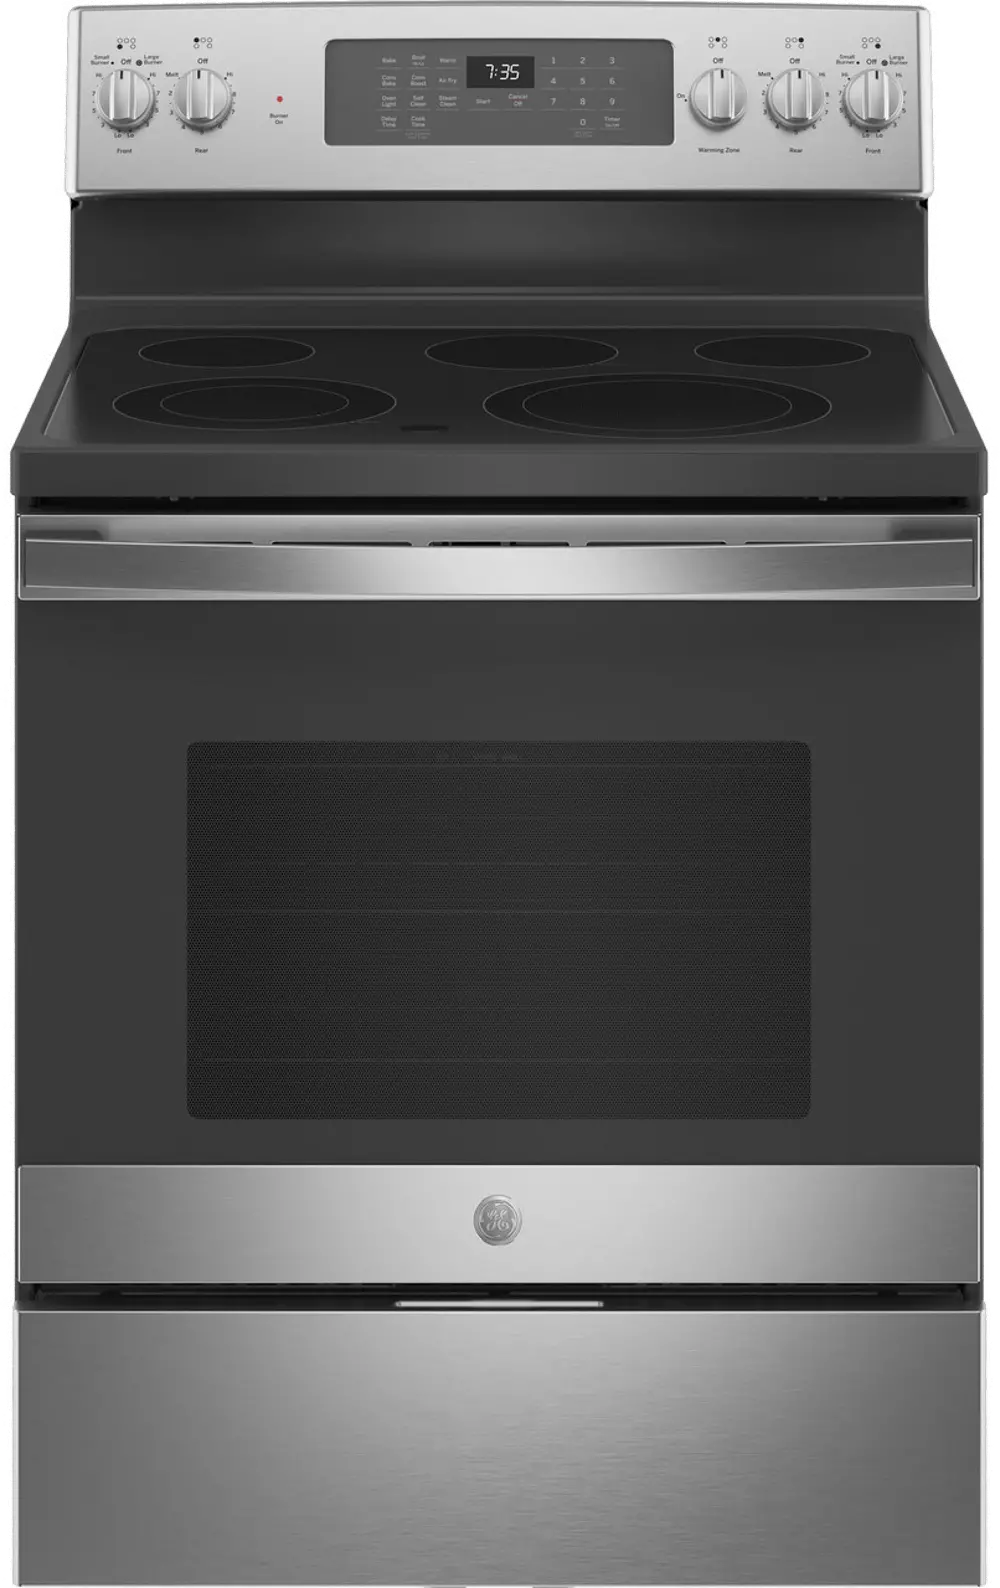 JB735SPSS GE 5.3 cu ft Electric Range - Stainless Steel-1